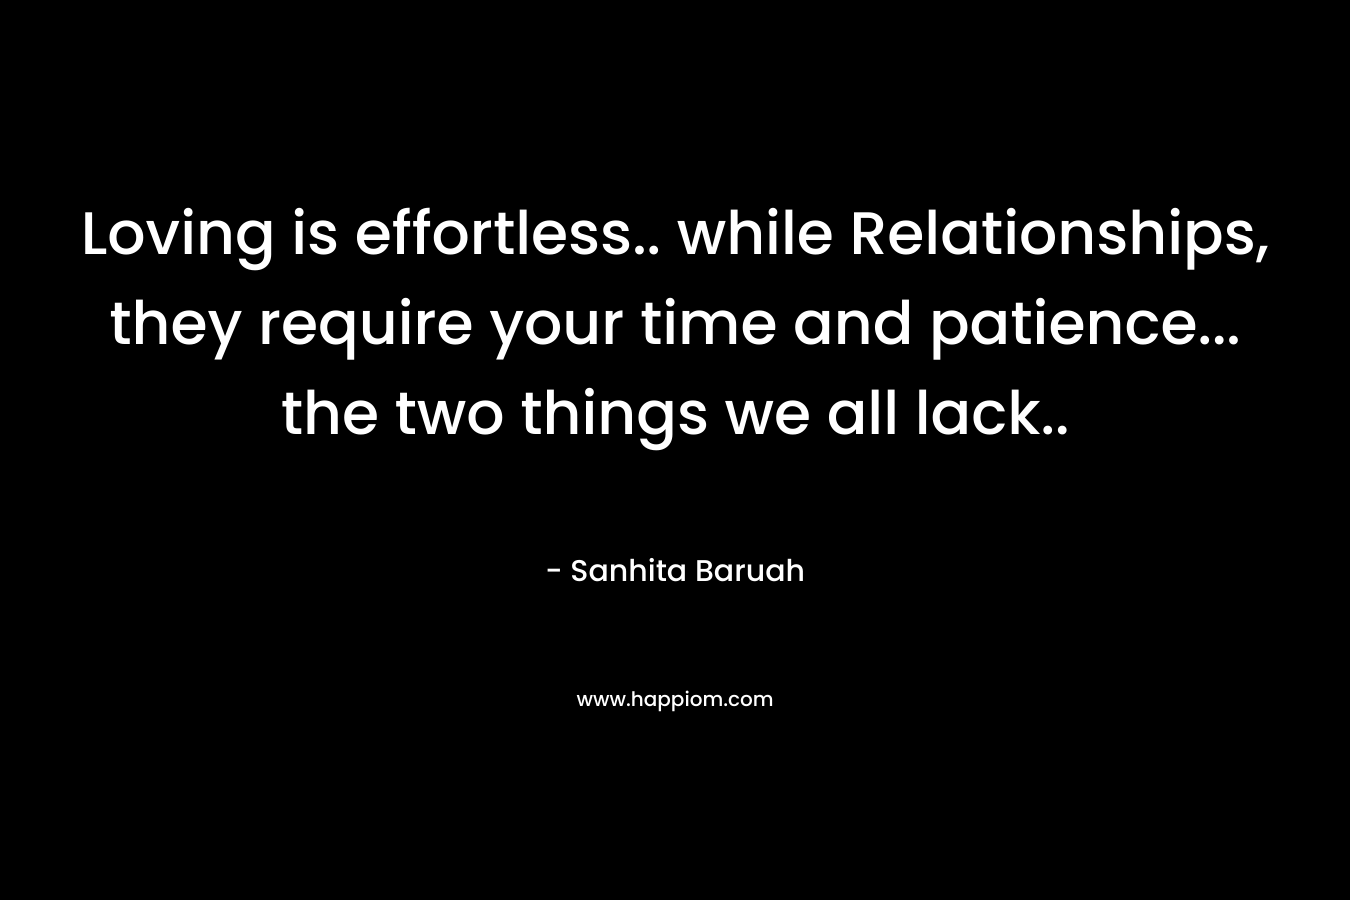 Loving is effortless.. while Relationships, they require your time and patience... the two things we all lack..